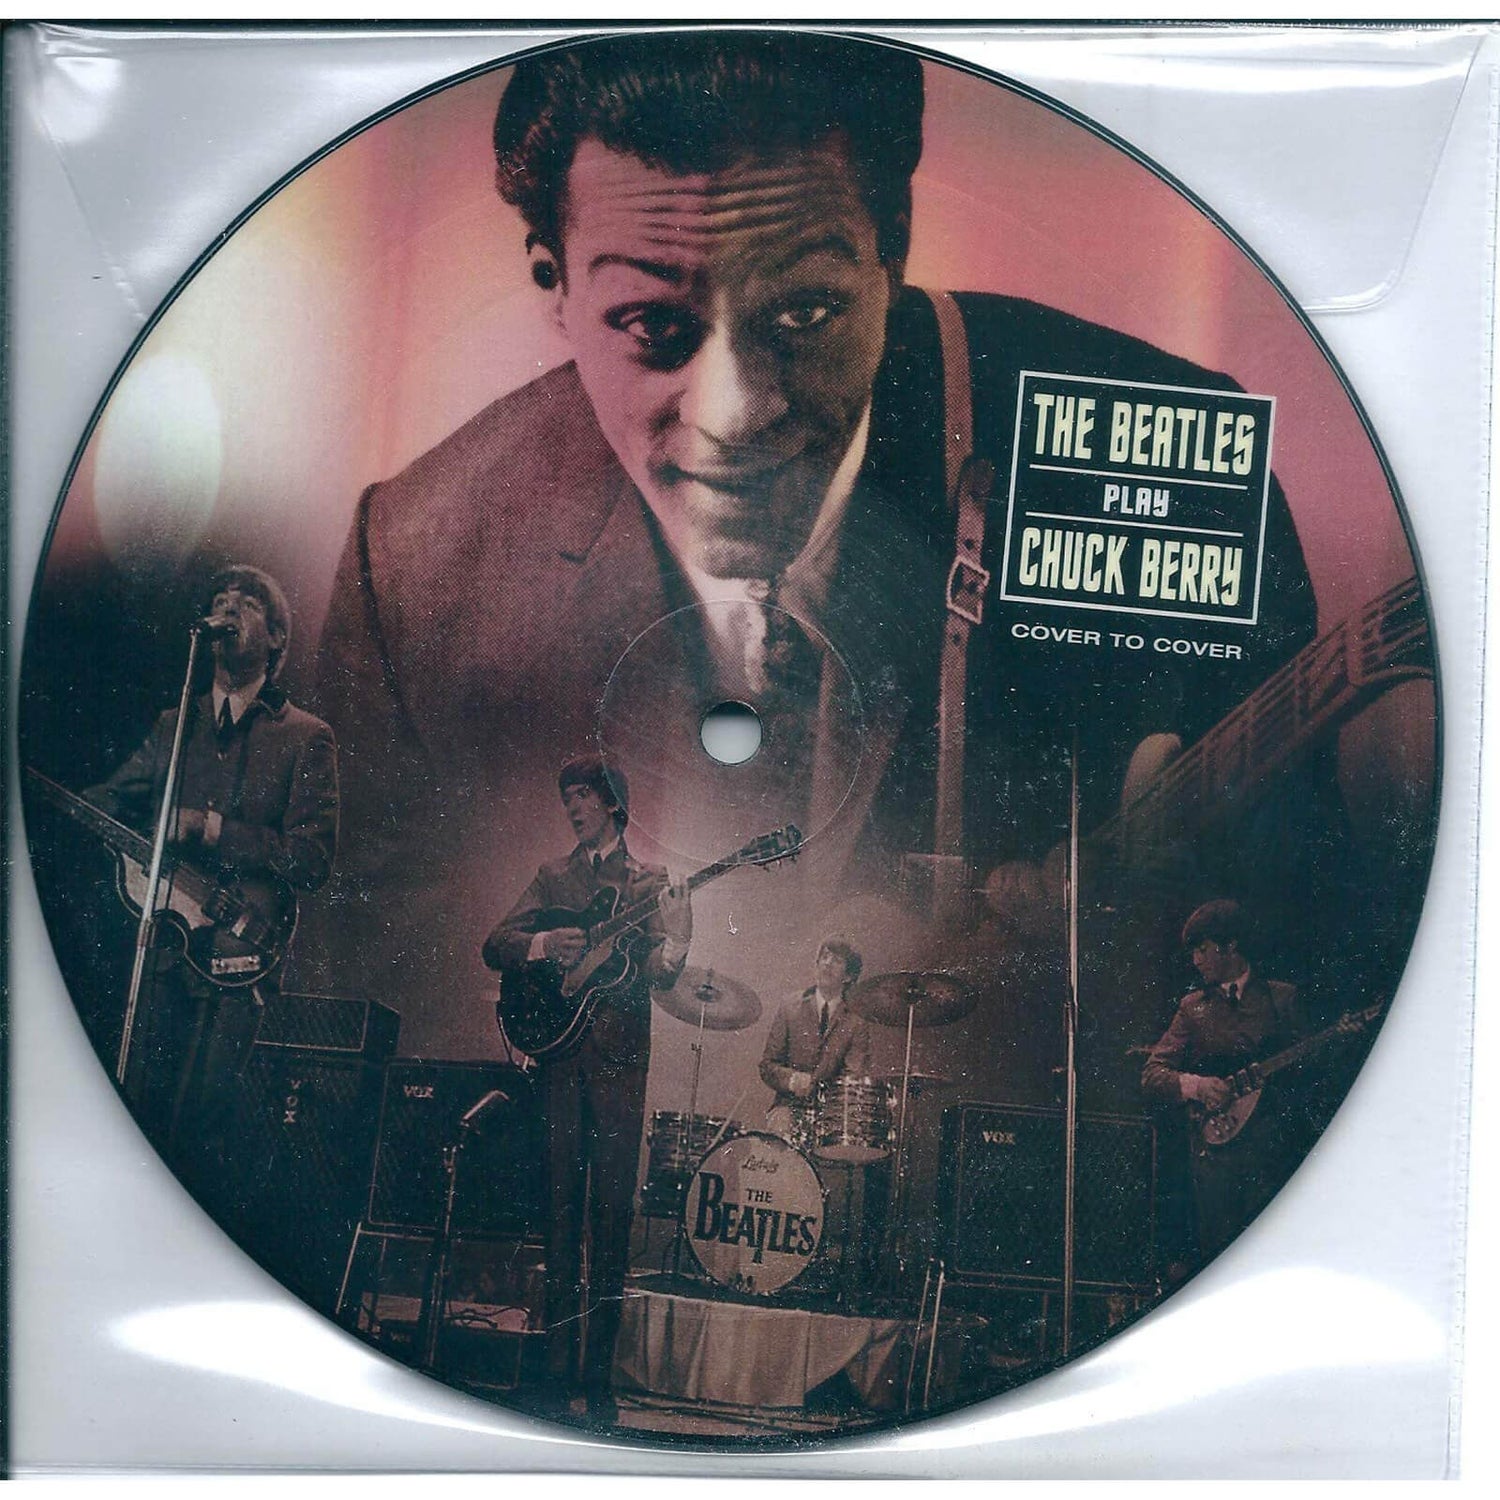 The Beatles - Beatles Play Chuck Berry (Picture Disc)18 cm .